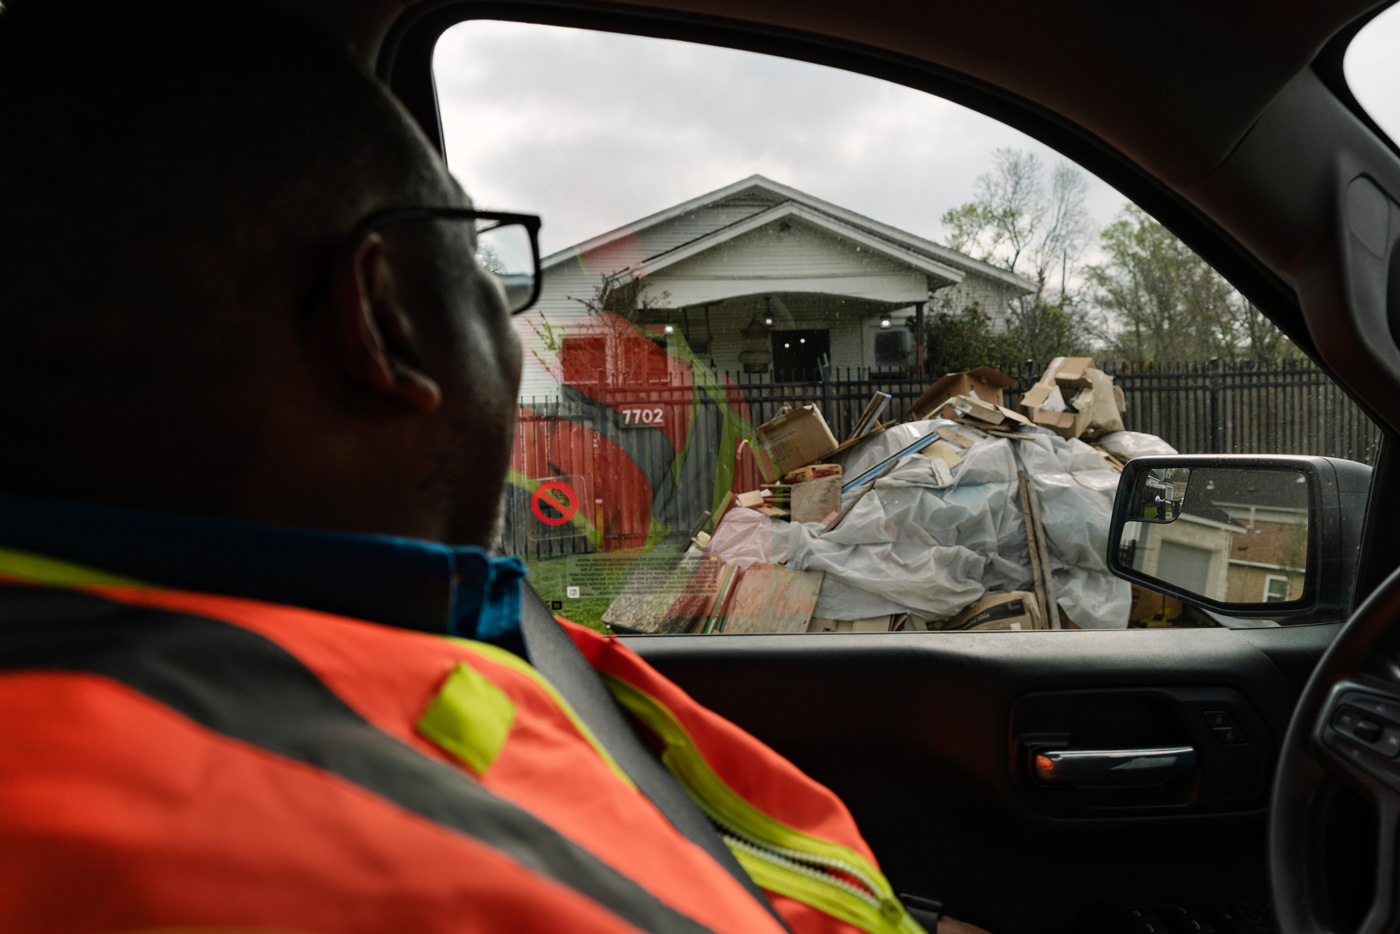 Solid waste management staff looks out the window to see a large pile of trash